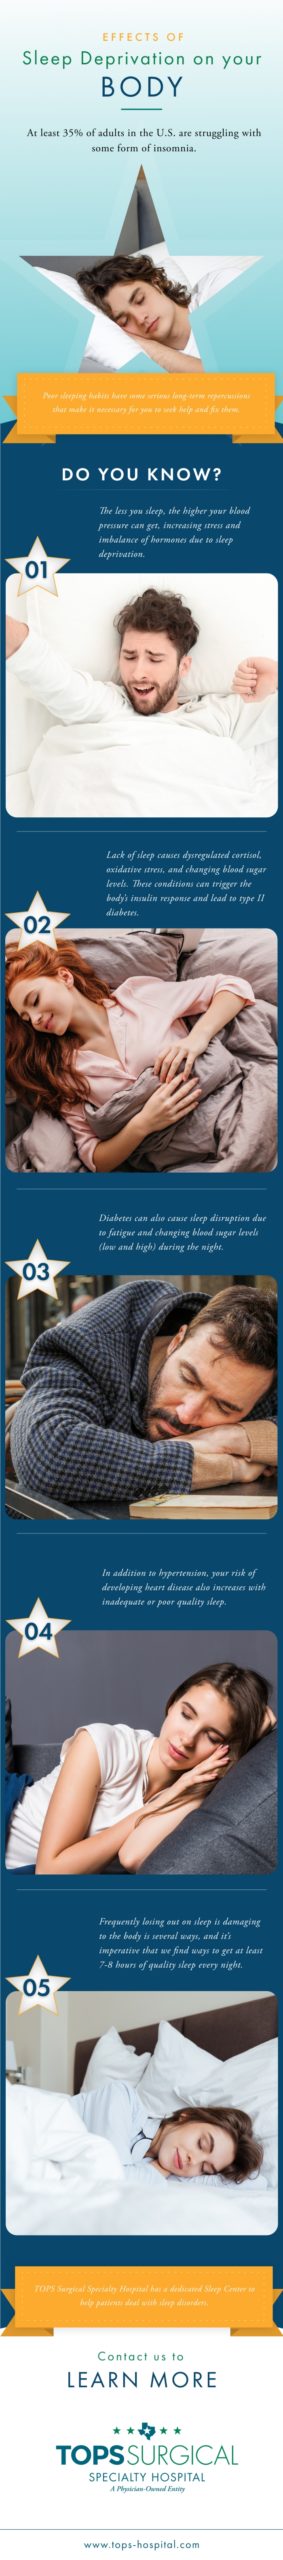 Poor sleeping habits have some long-term repercussions that make it necessary for you to seek help to fix them.